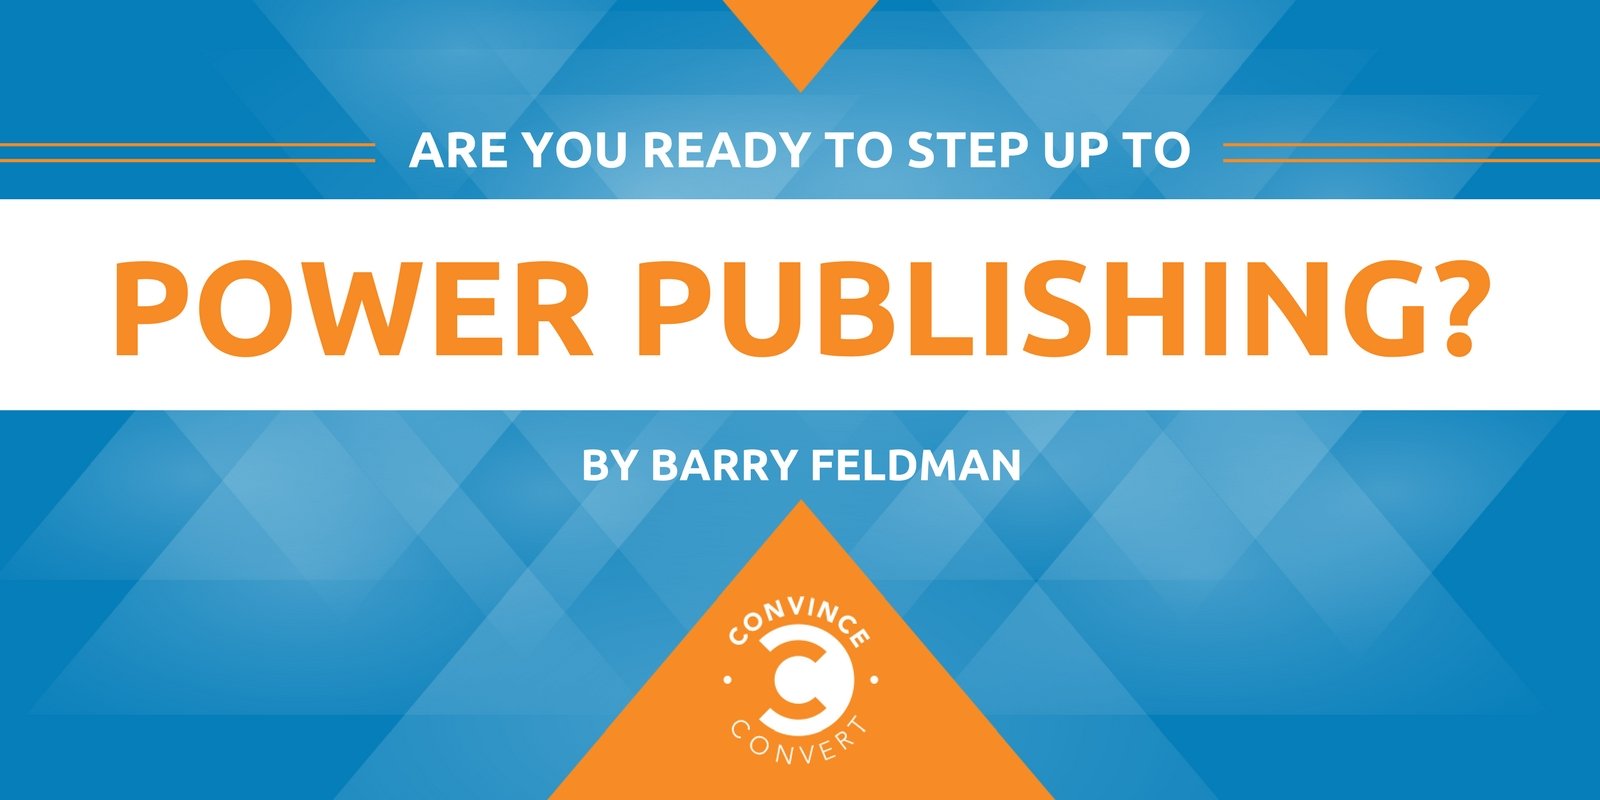 Are You Ready to Step Up to Power Publishing